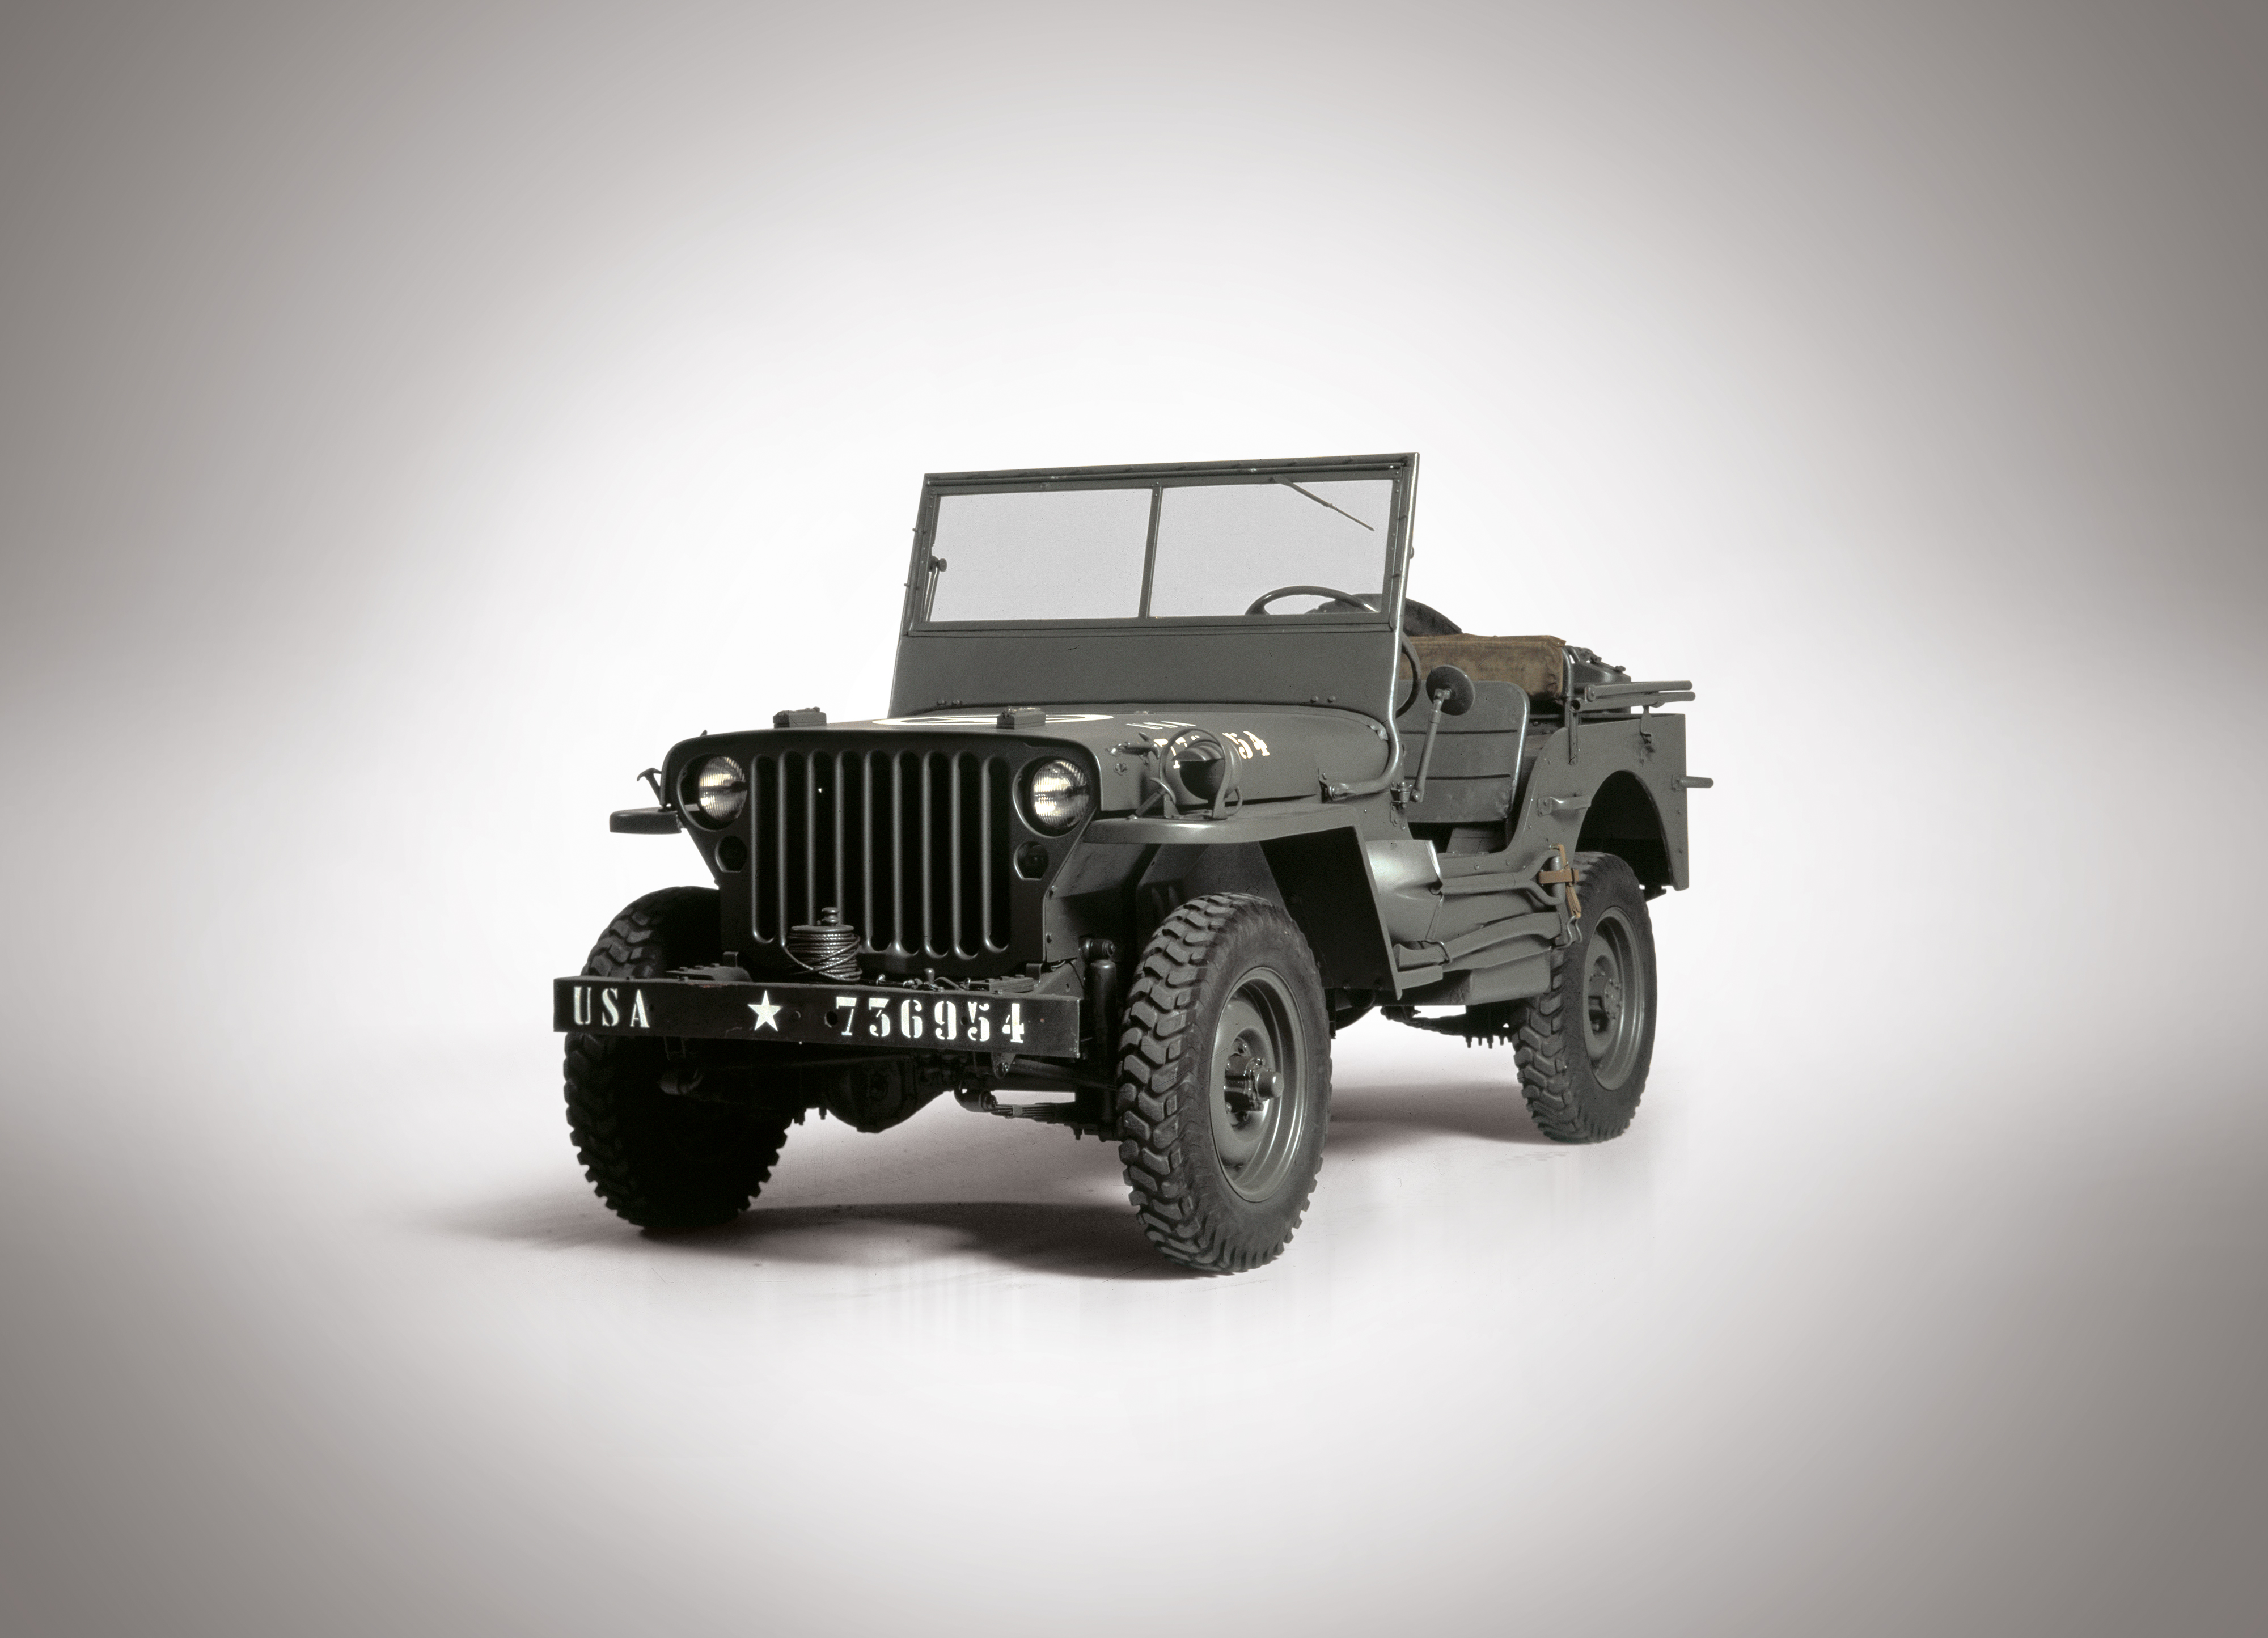 1943 willys-overland mb (jeep) 1/4 ton